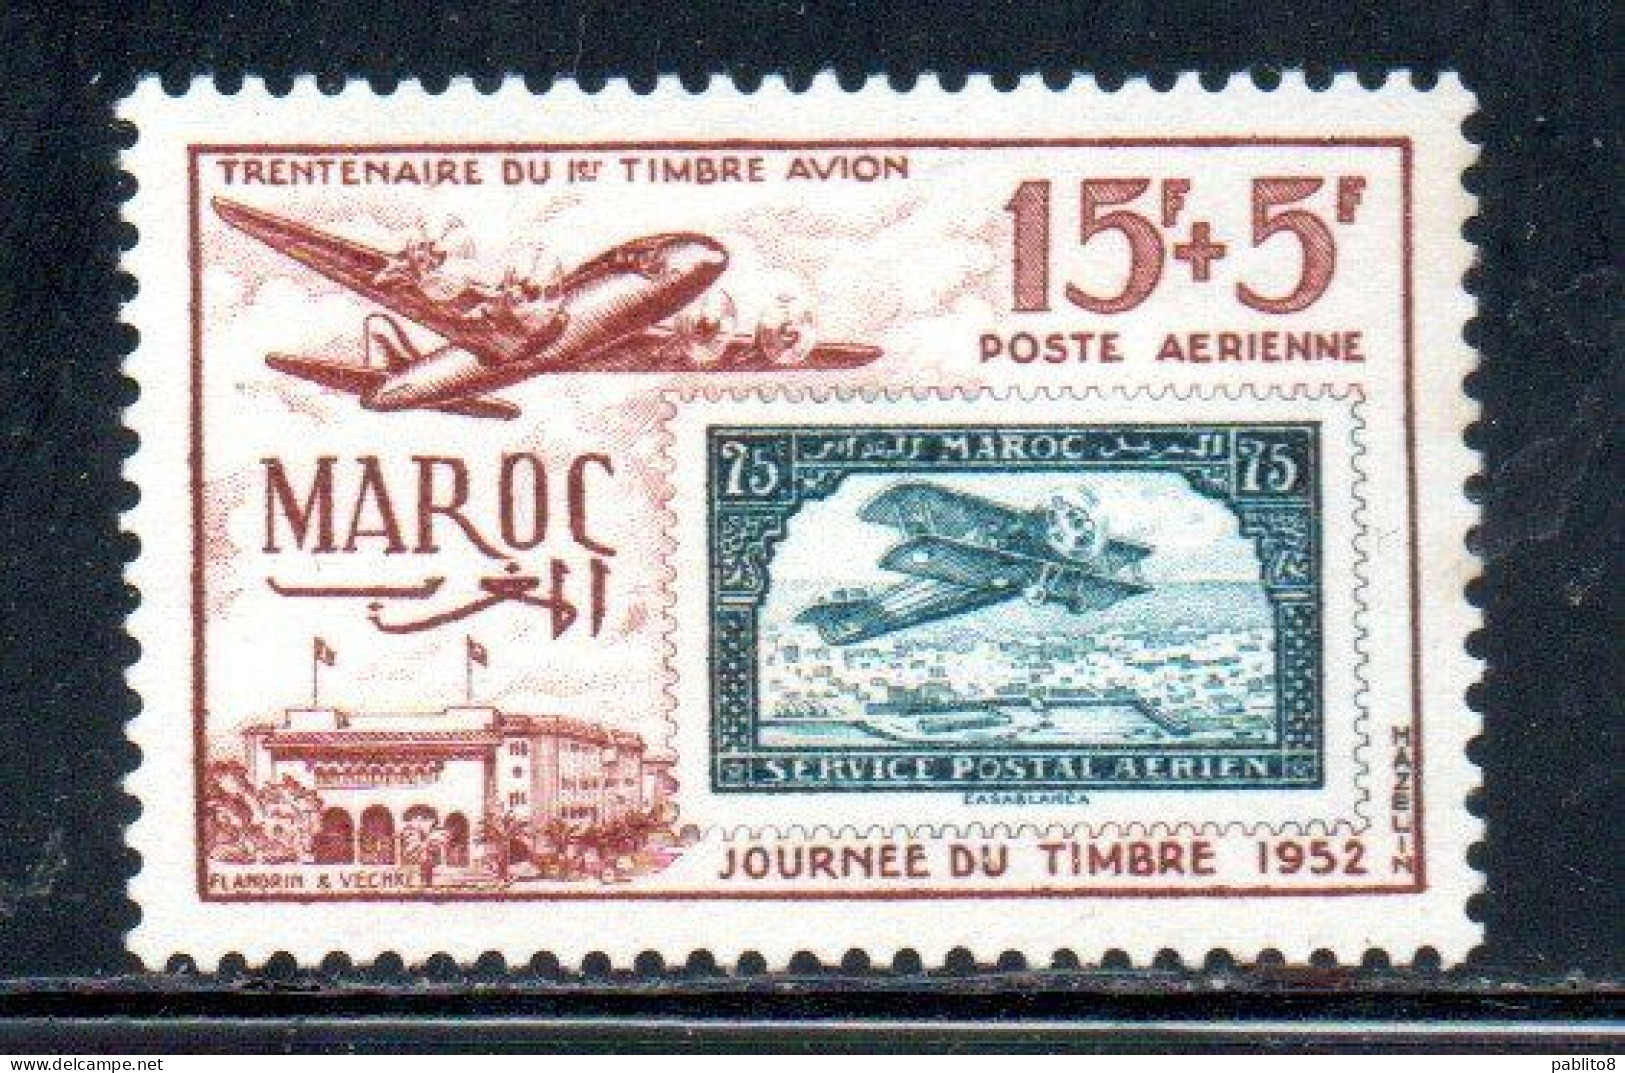 MAROC FRANCAISE MAROCCO FRANCESE FRENCH MOROCCO 1952 DAY OF THE STAMP JOURNEE DU TIMBRE CASABLANCA 15fr + 5fr MLH - Unused Stamps